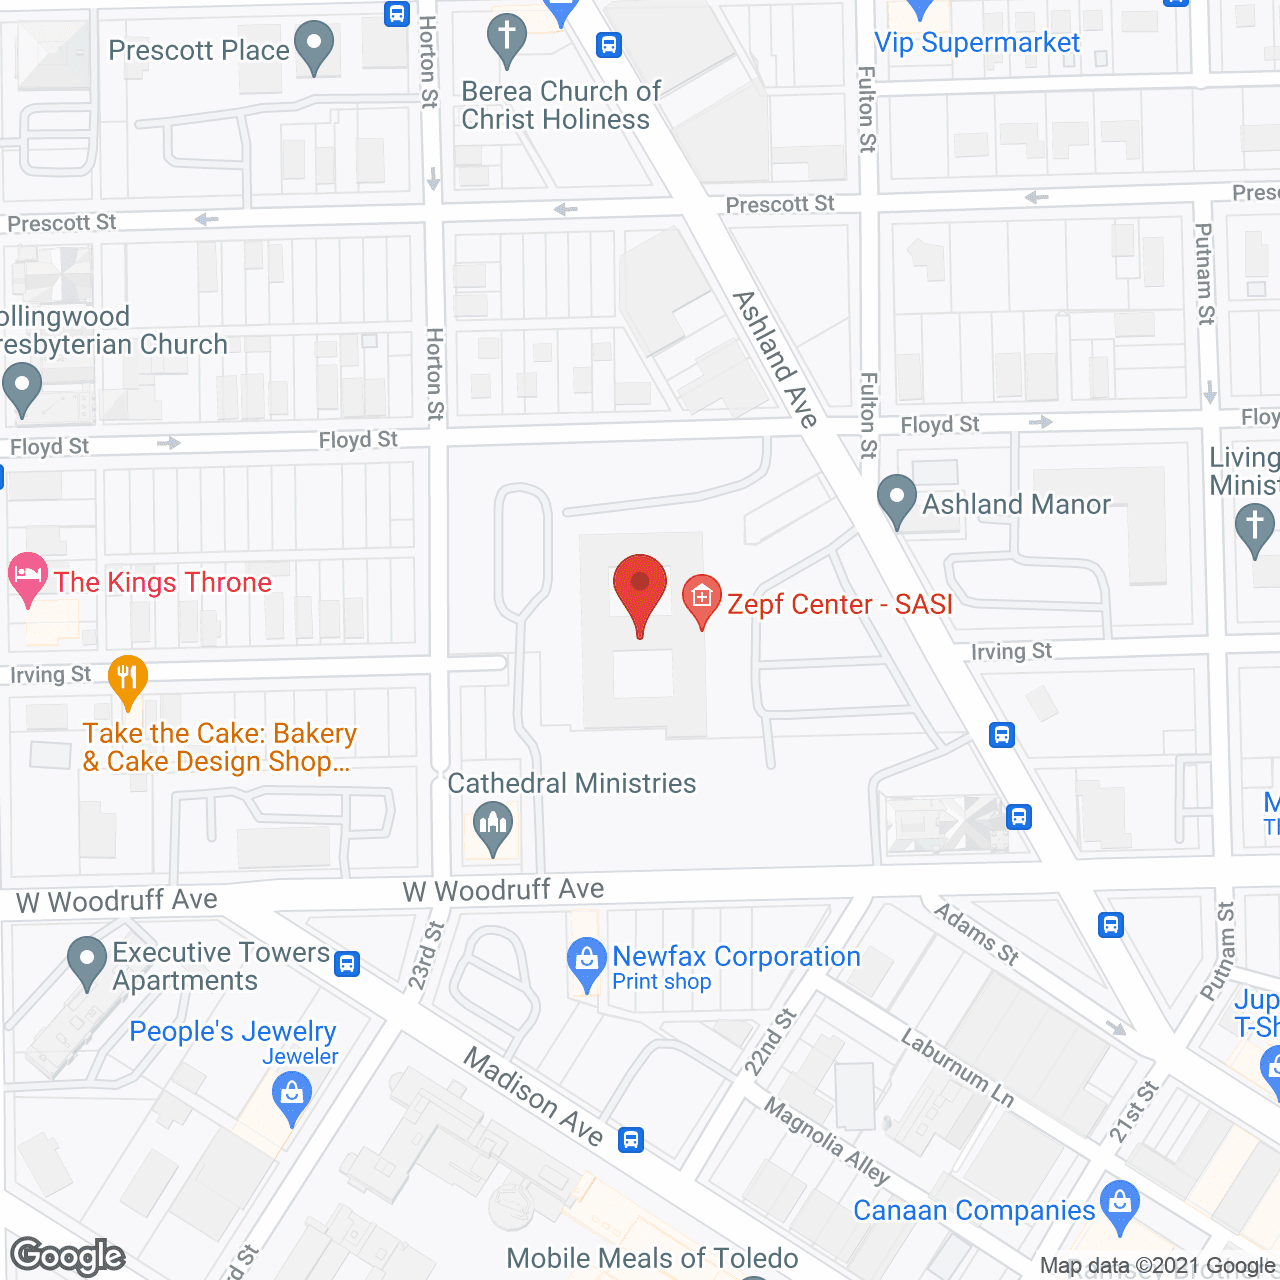 Plaza Care Ctr in google map